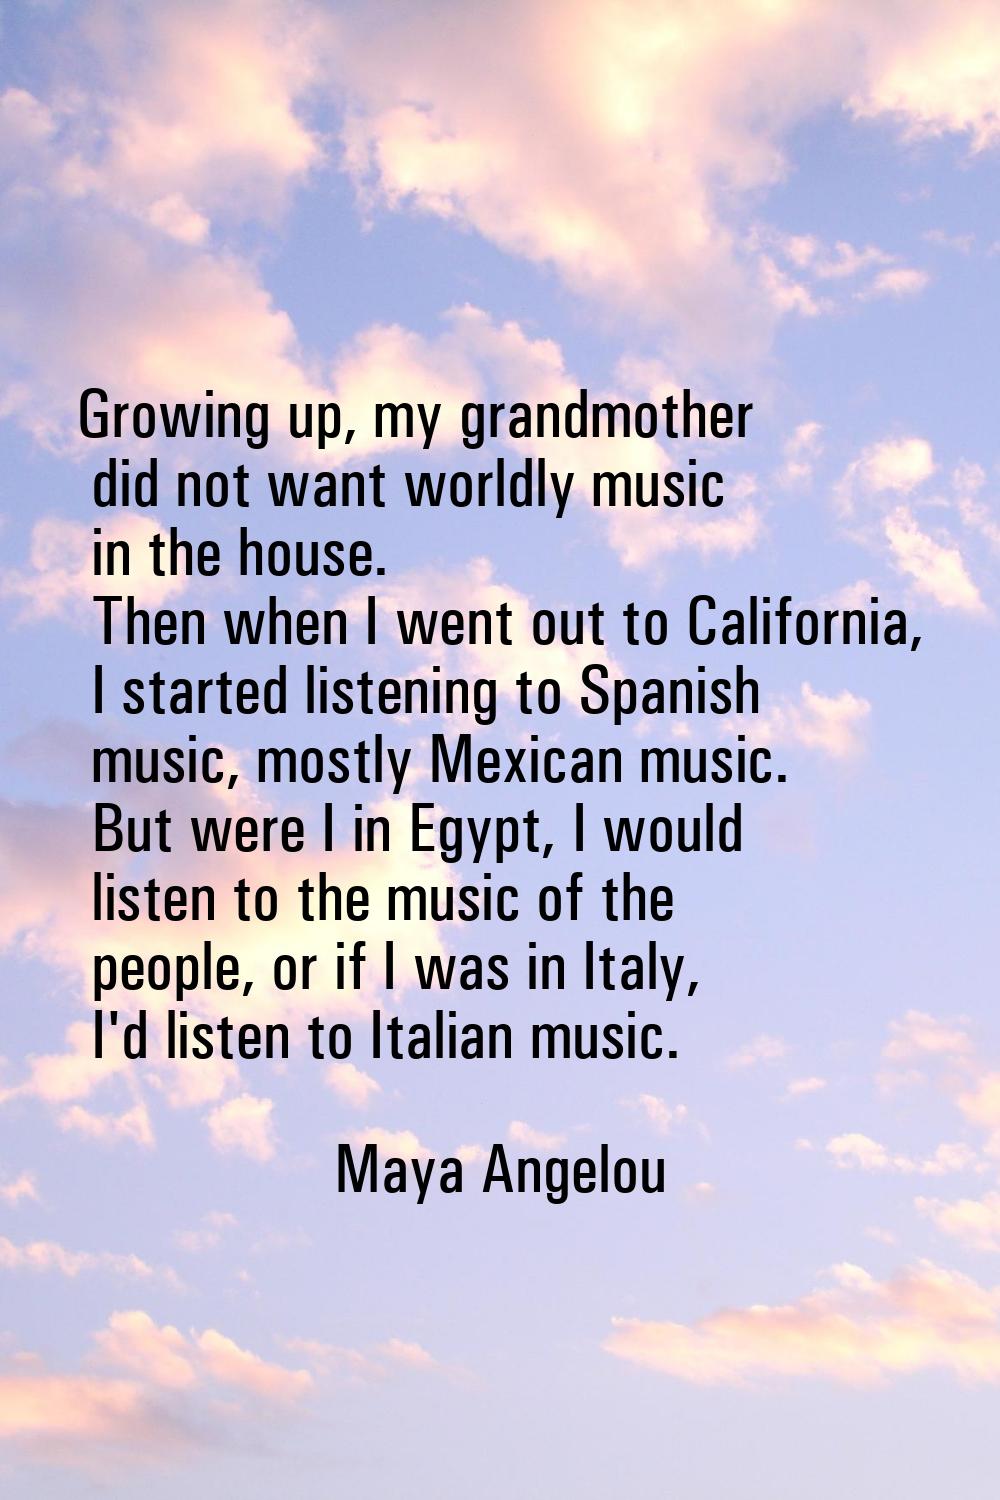 Growing up, my grandmother did not want worldly music in the house. Then when I went out to Califor